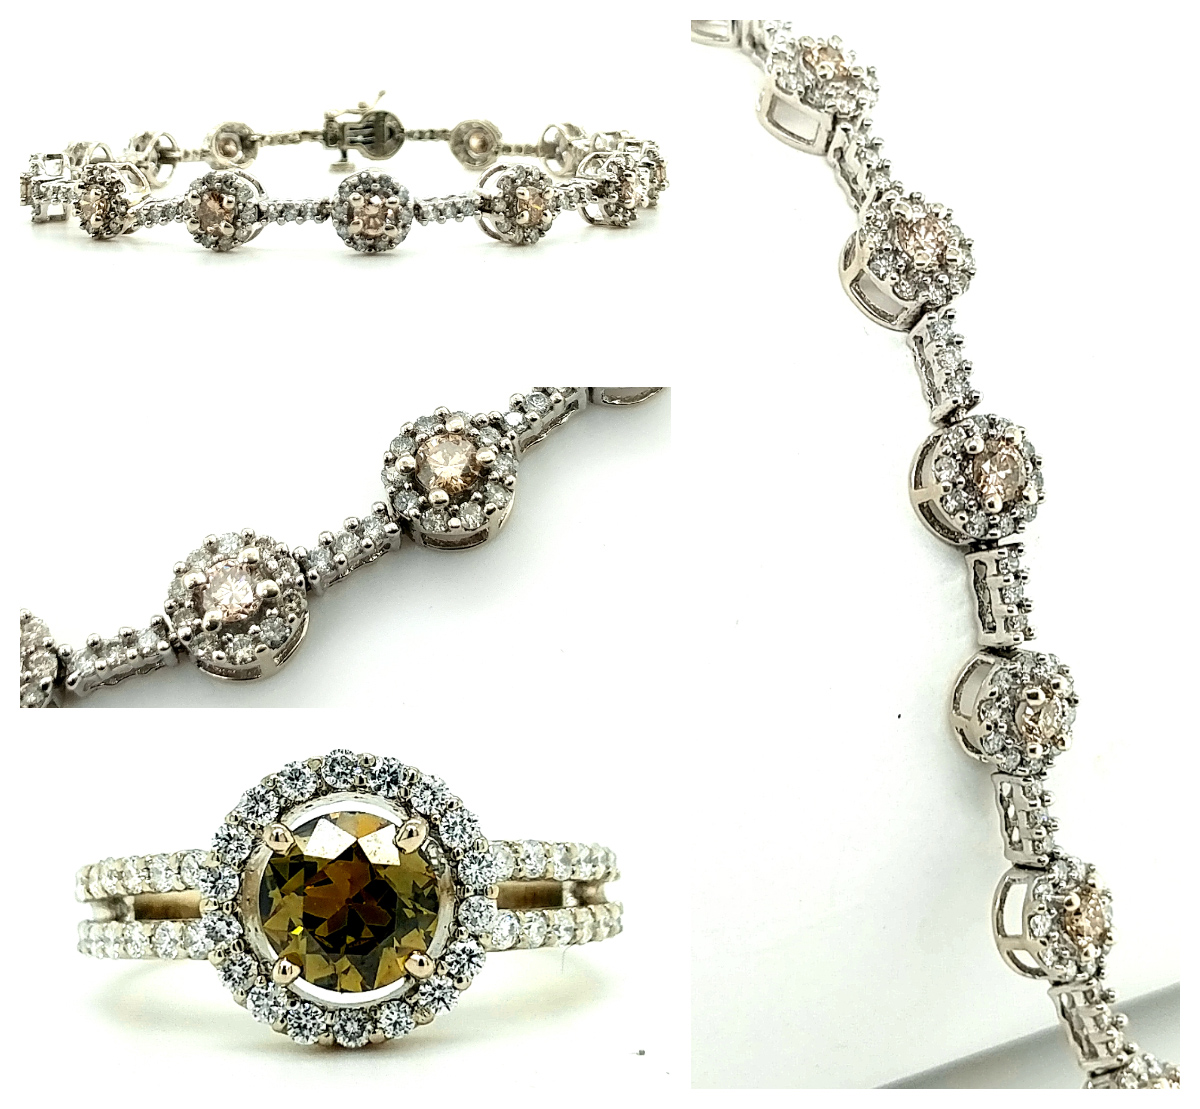 #Diamonds are #billions of years old! Sometimes 3 billion years old! Bid on these old #gems because we aren't getting any younger! #sneakpeek ' Hidden Treasures Auction' ow.ly/ab1o50GiVfb  #auctionhouses #diamonds #lux #diamondaddict #jewelry  #sale #onlineauctions